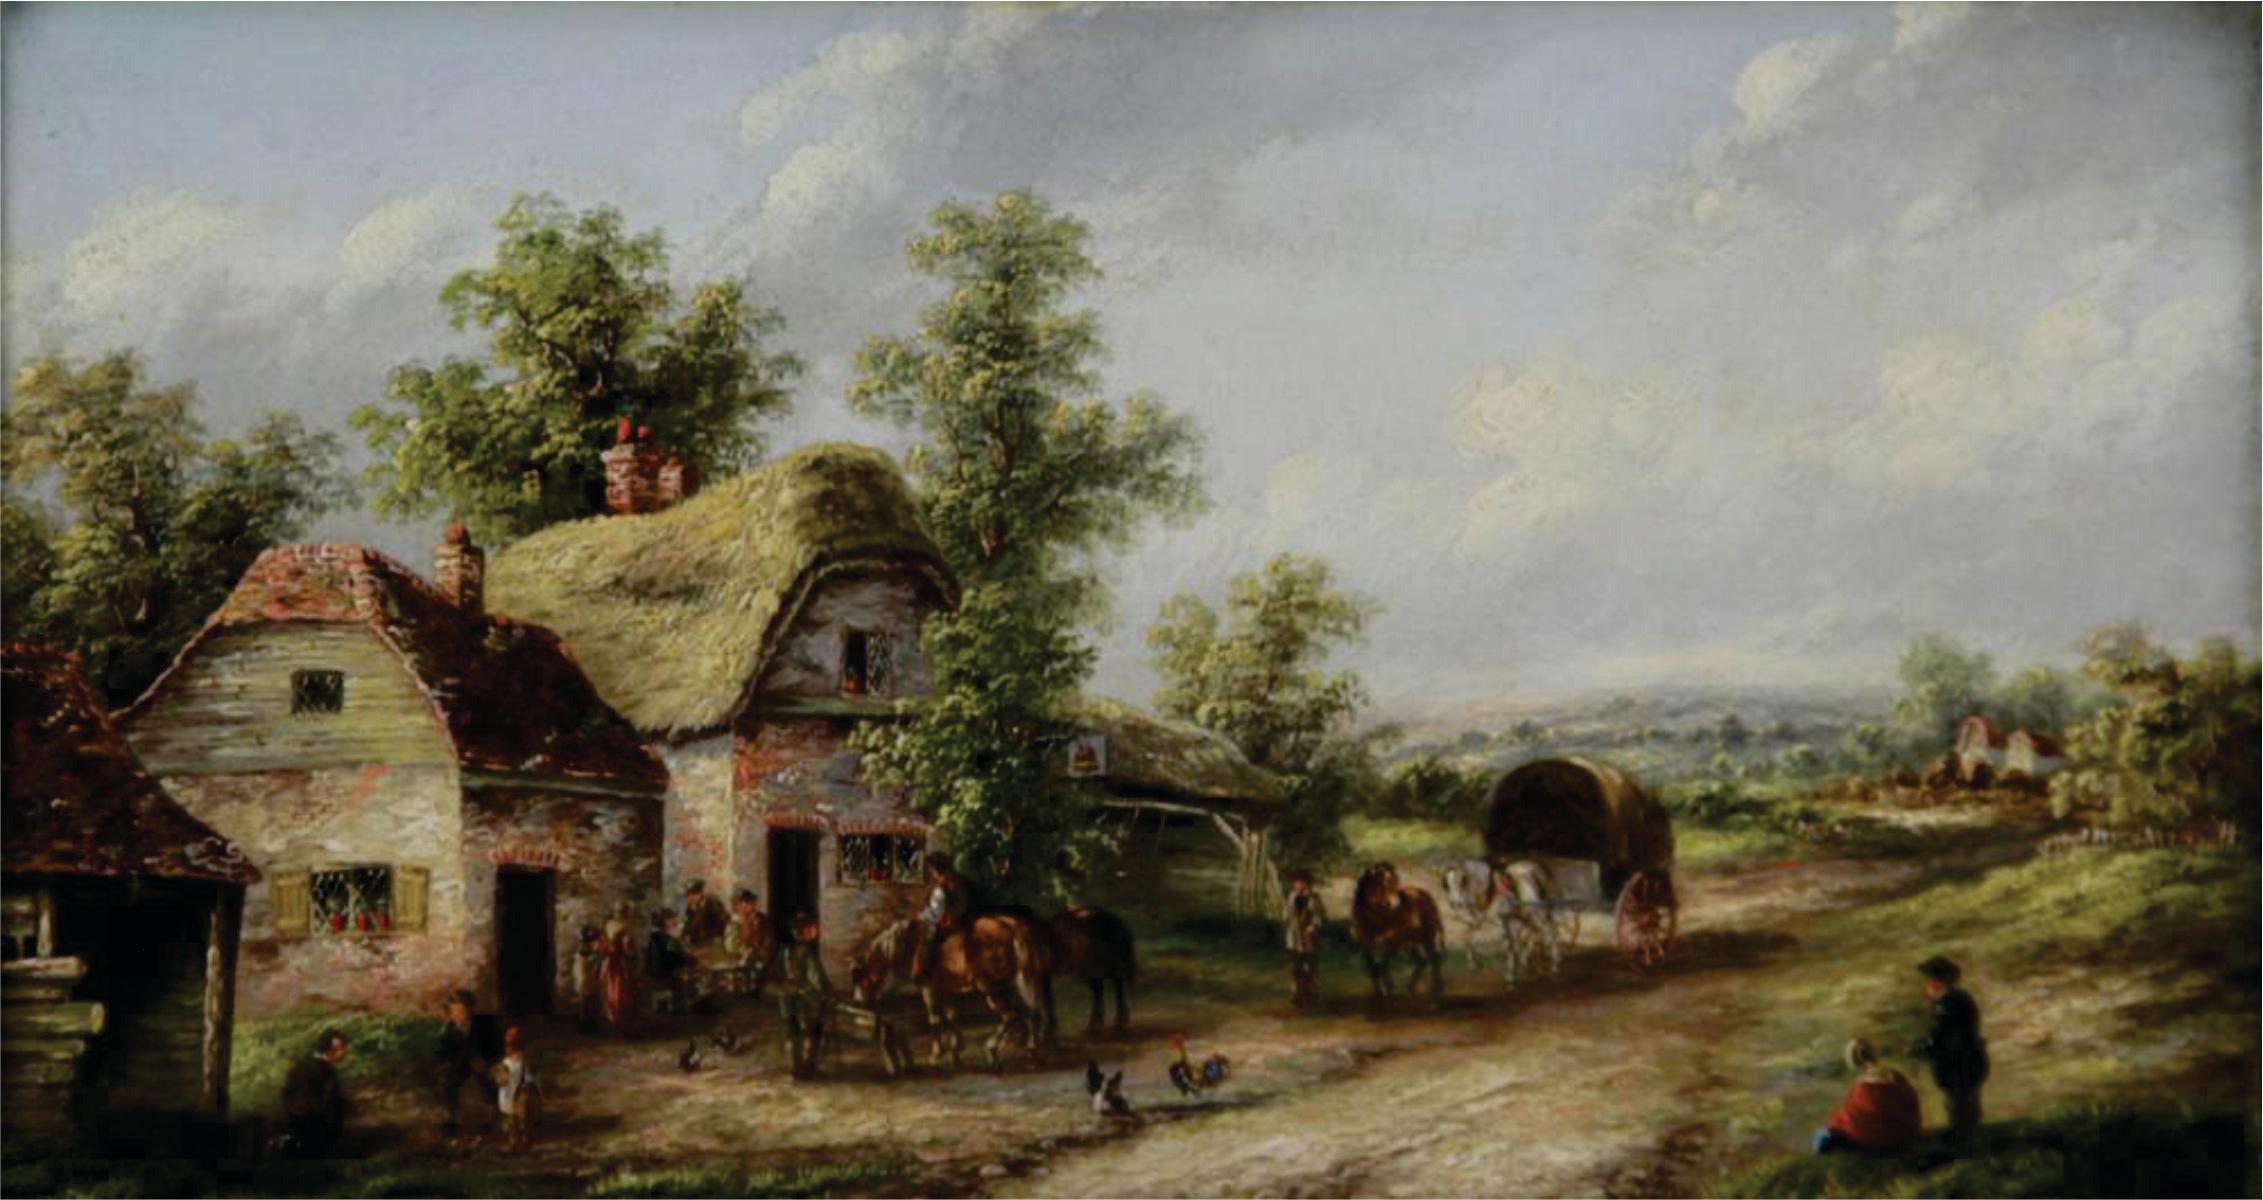 Edward Masters, farmyard scene, oil on canvas, dated 1878, 
Dimensions: Image: 18